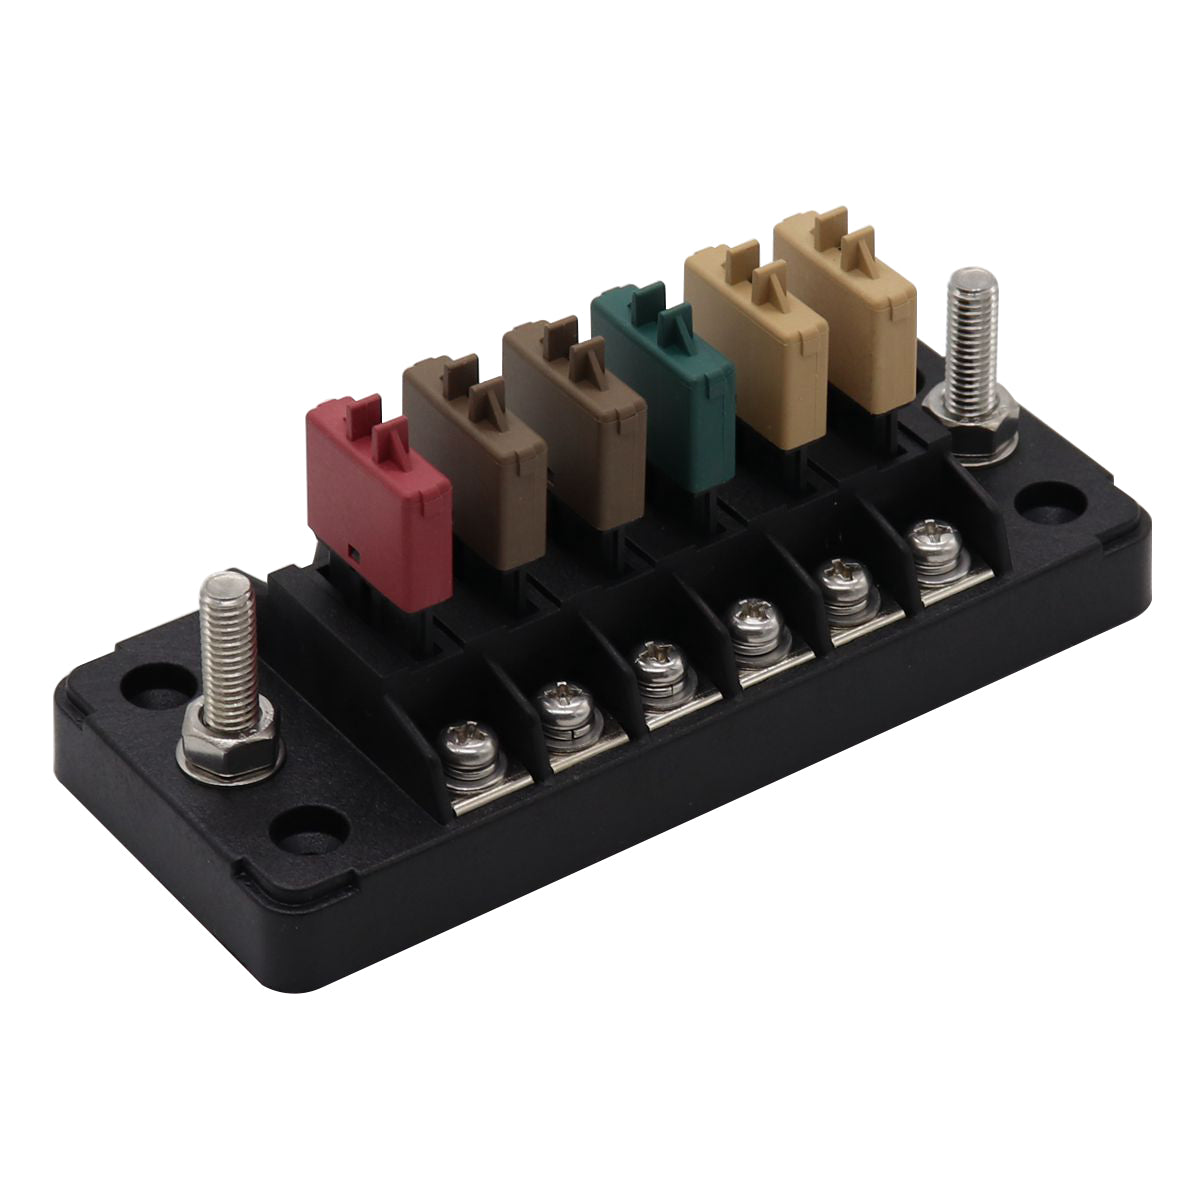 Black 75A Circuit Fuse Block With Negative Bus 6 Way Fuse Box Ground Negative for Bus Car Boat Marine Auto